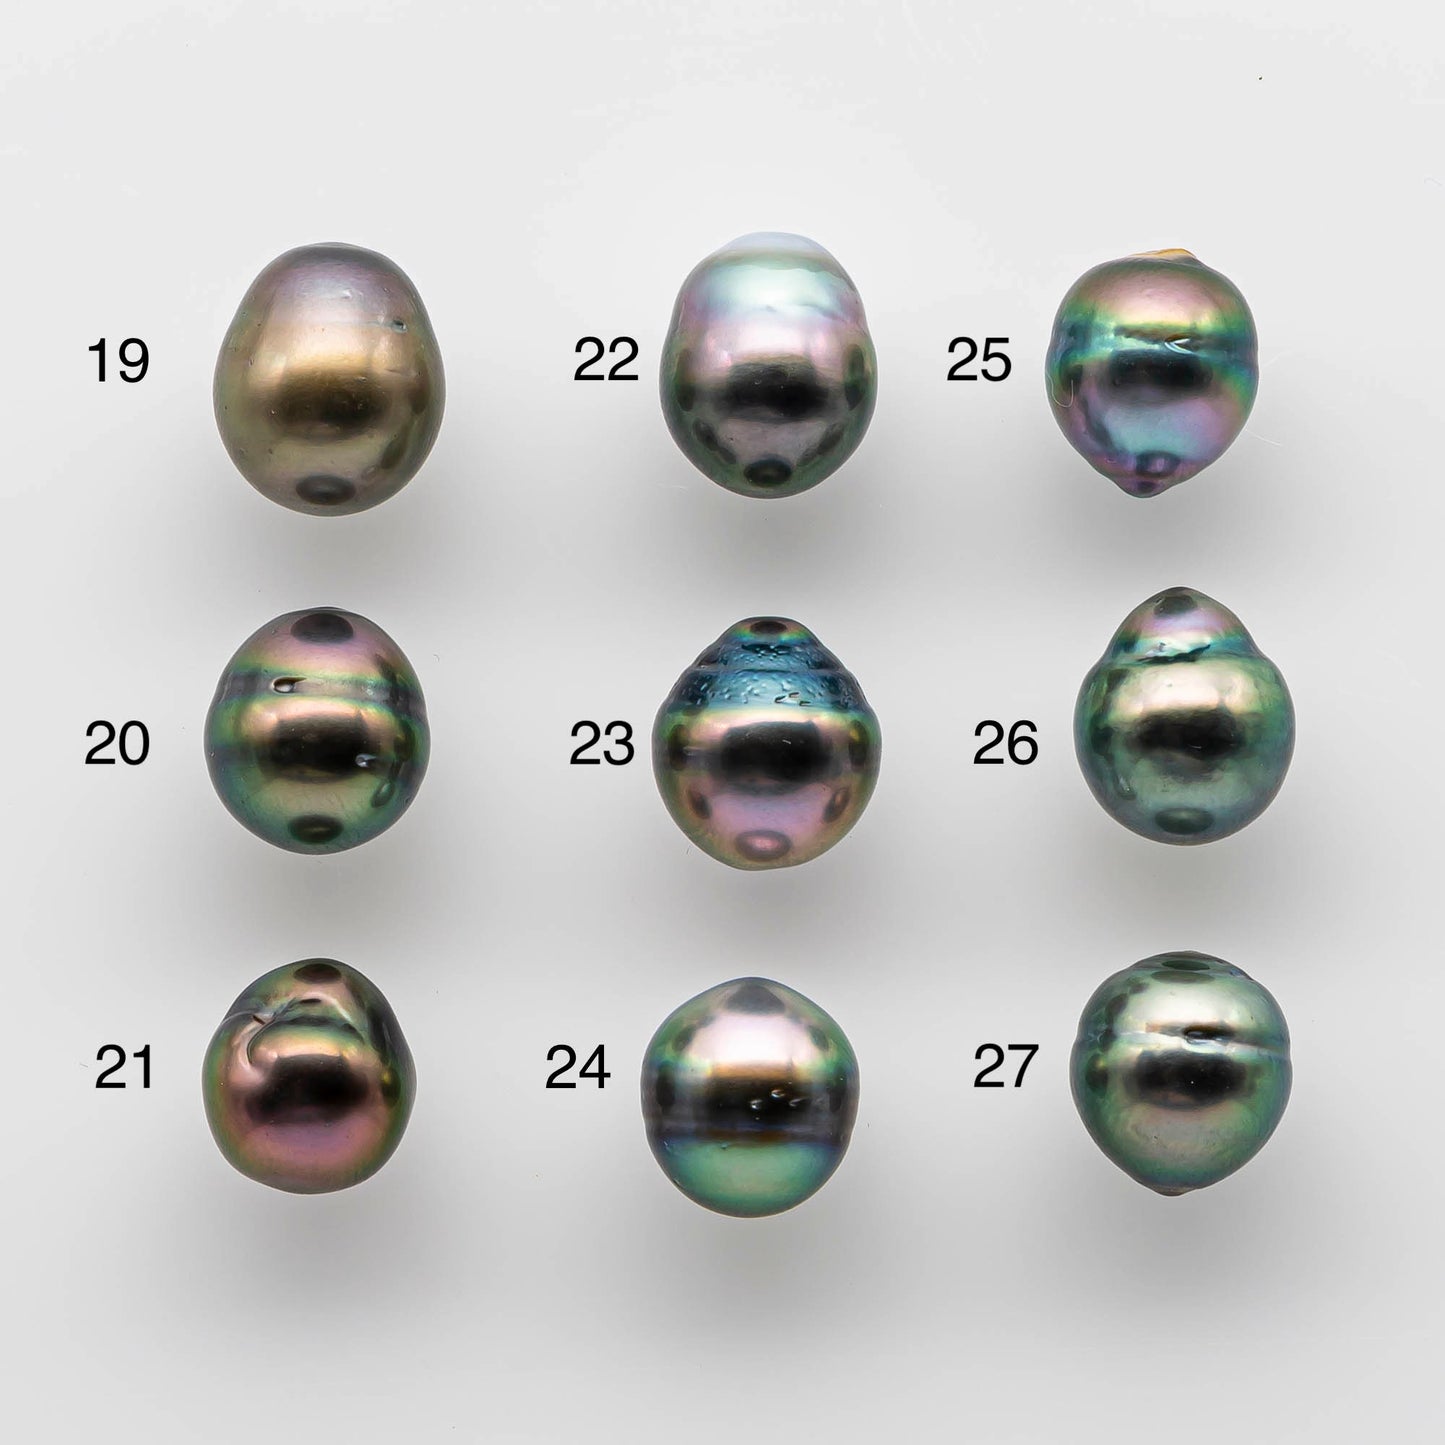 9-10mm Loose Tahitian Pearl Drop in Natural Color and High Luster with Blemish, Loose Undrilled or Drilled or Large Hole, SKU # 1746TH